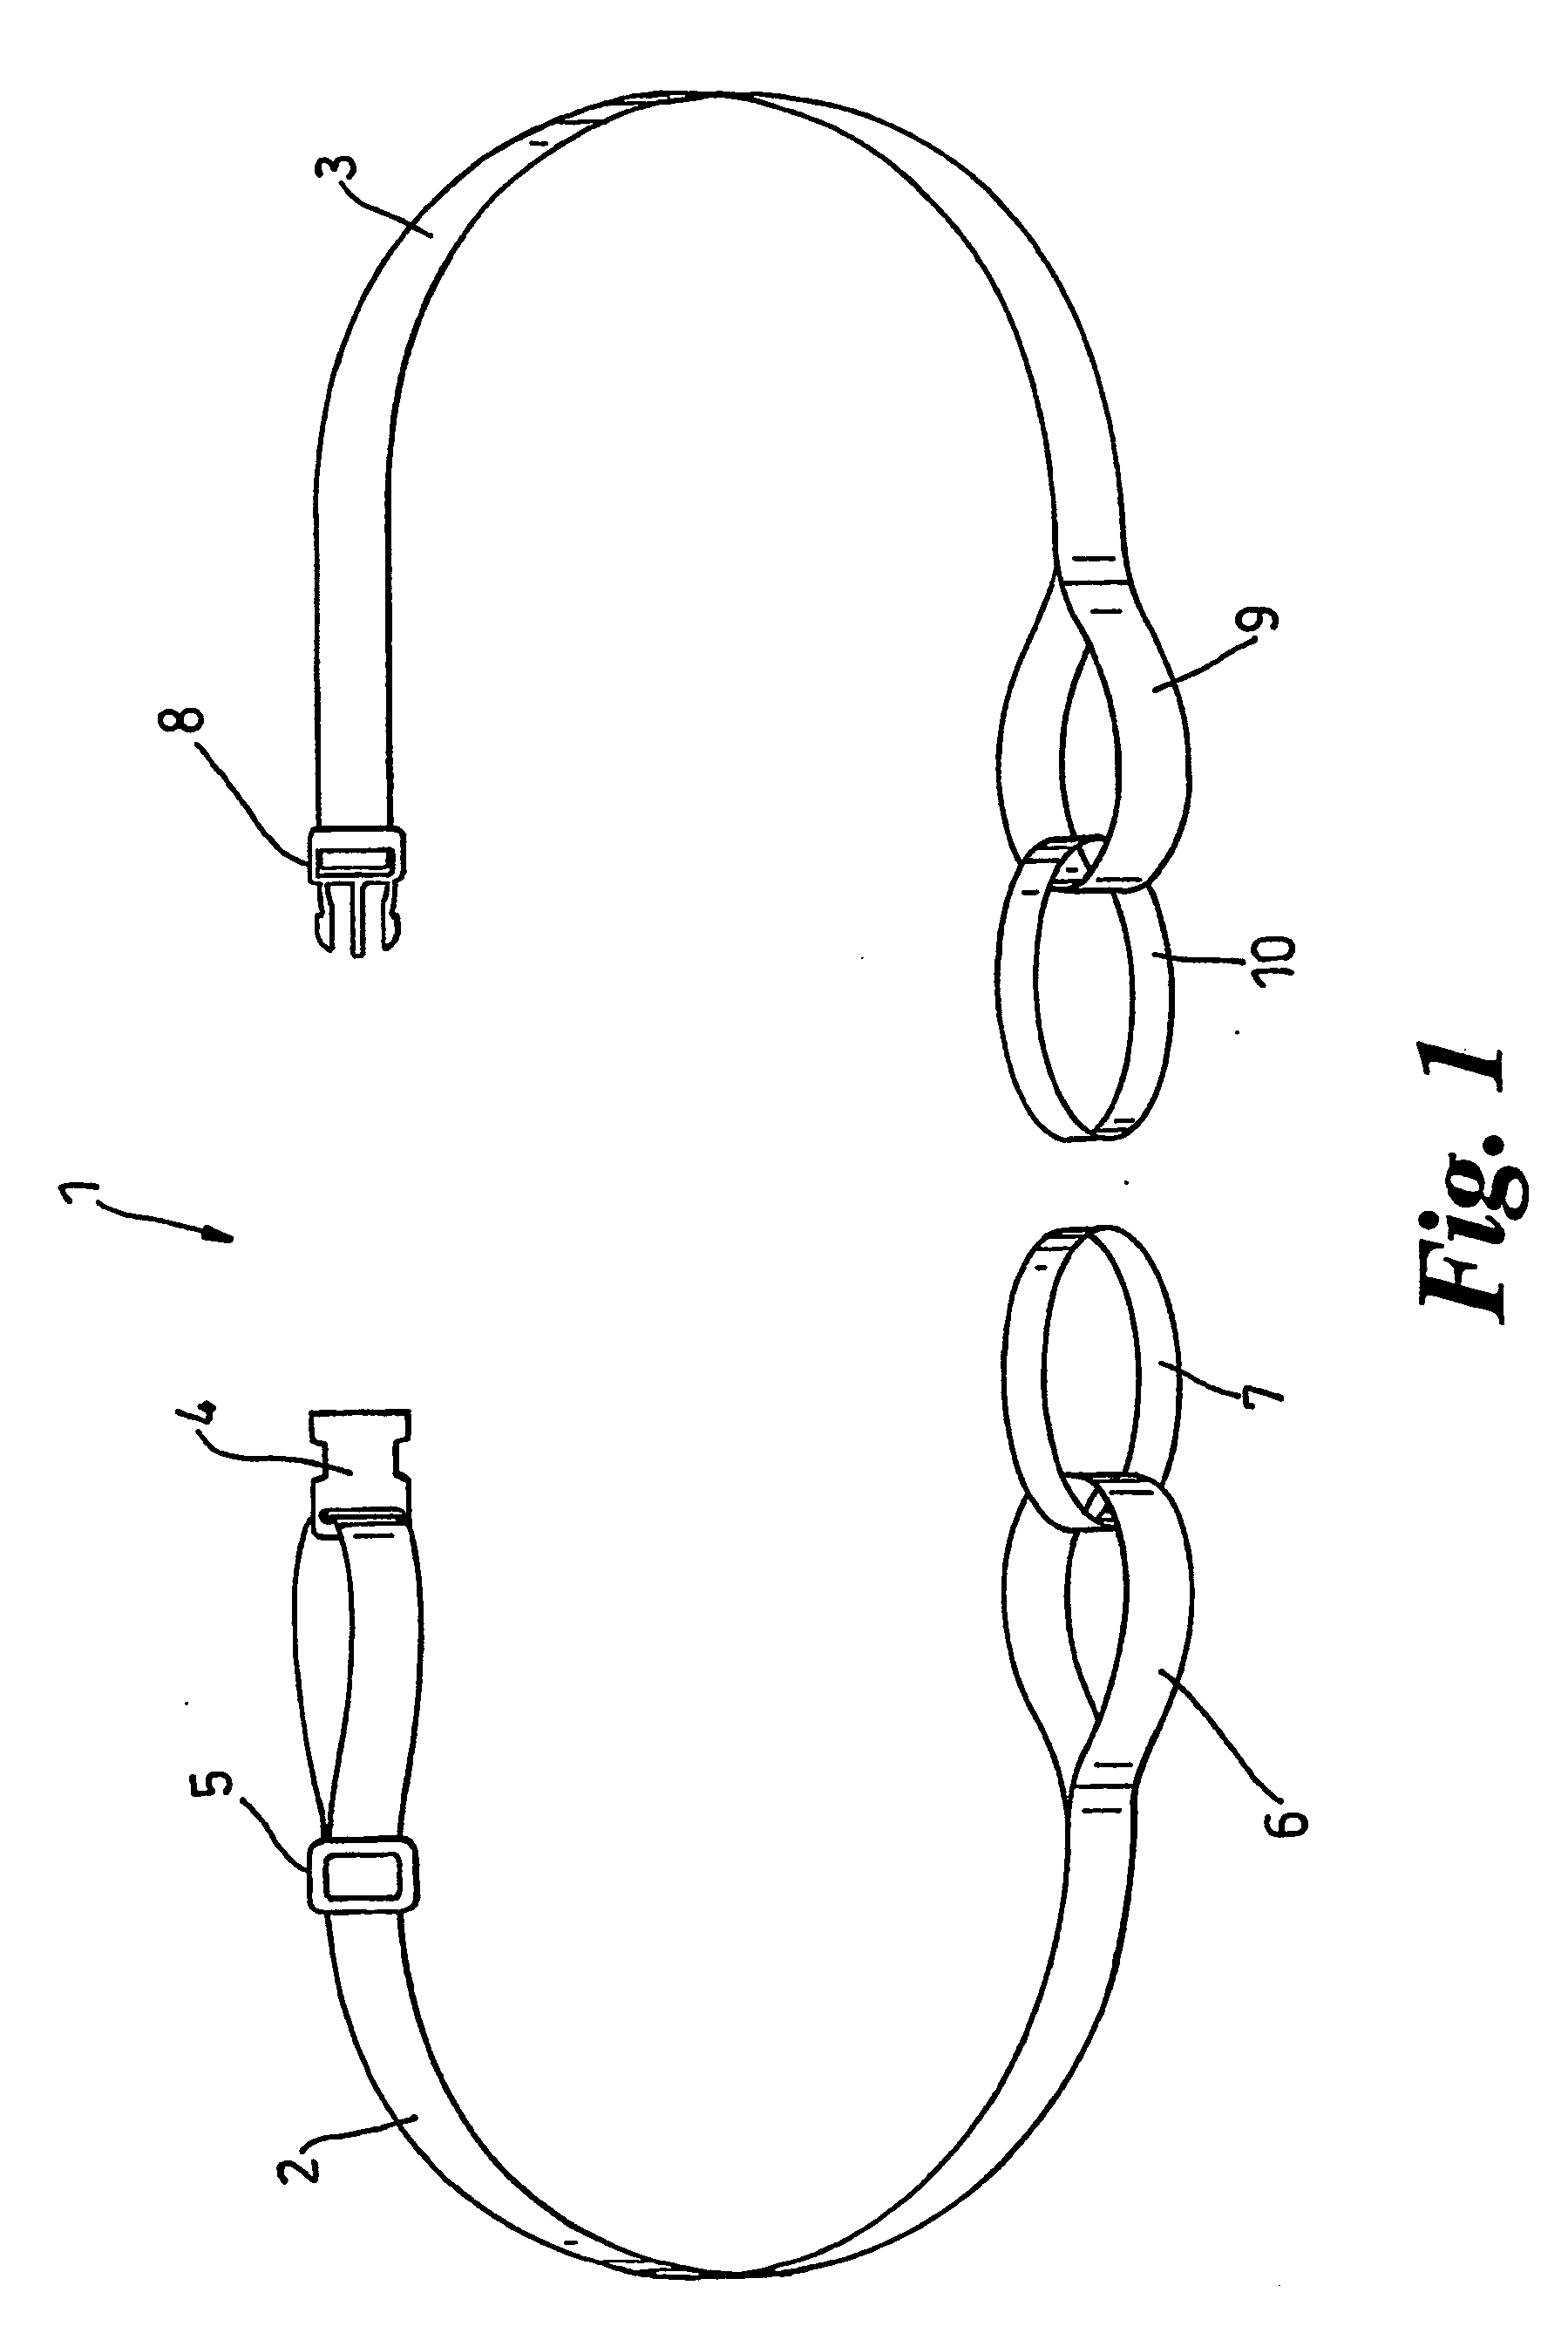 Ski carrying device